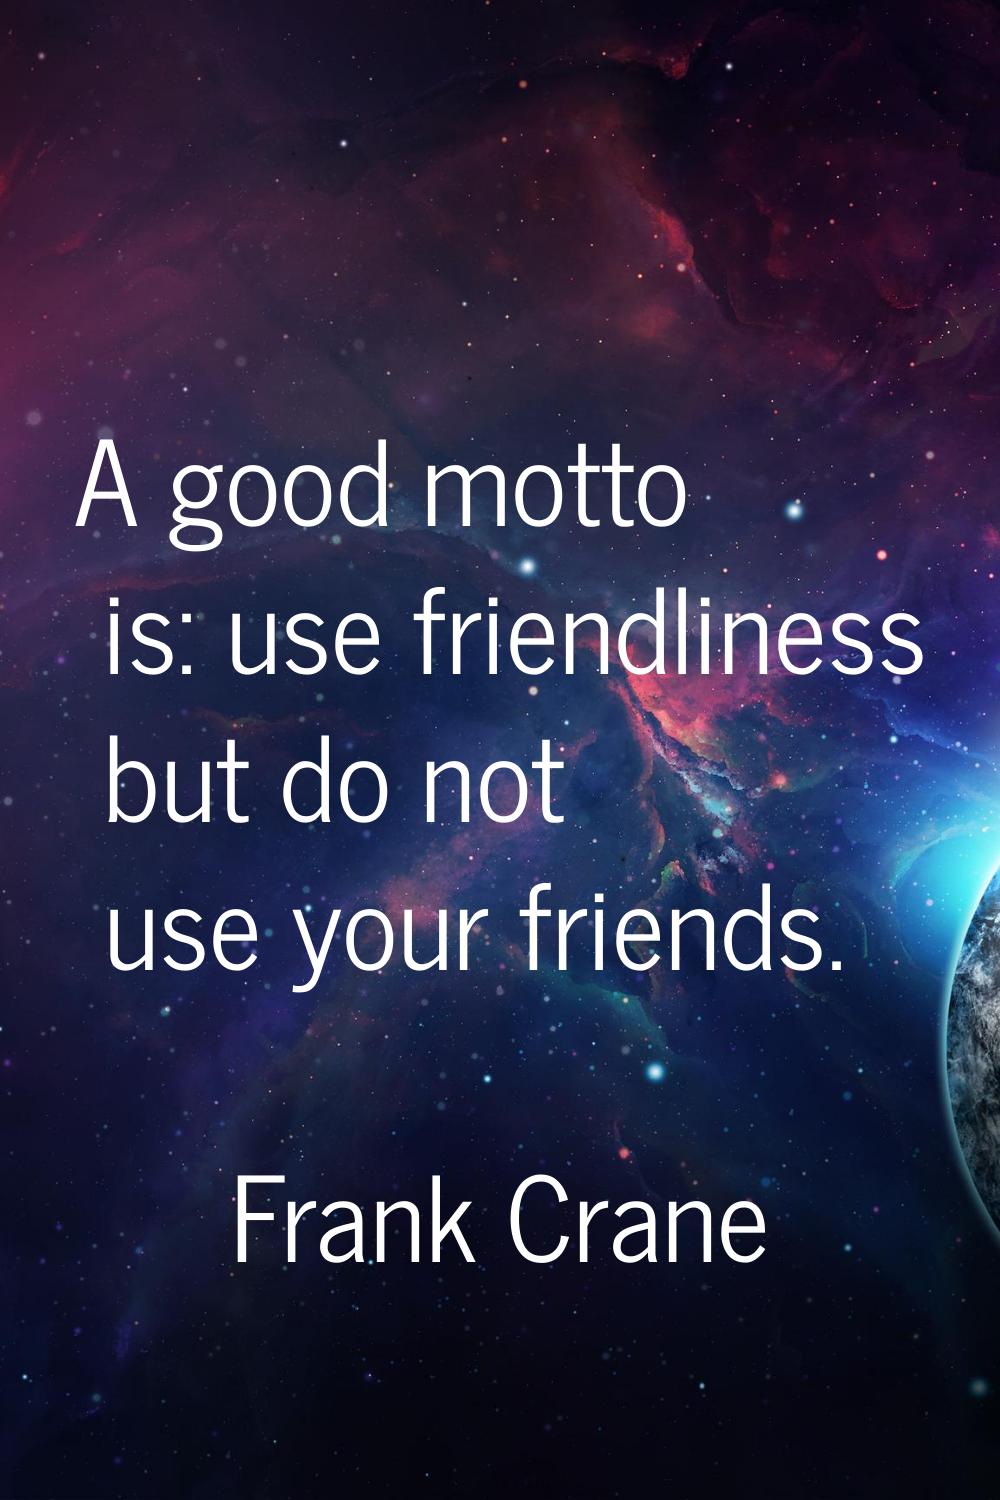 A good motto is: use friendliness but do not use your friends.